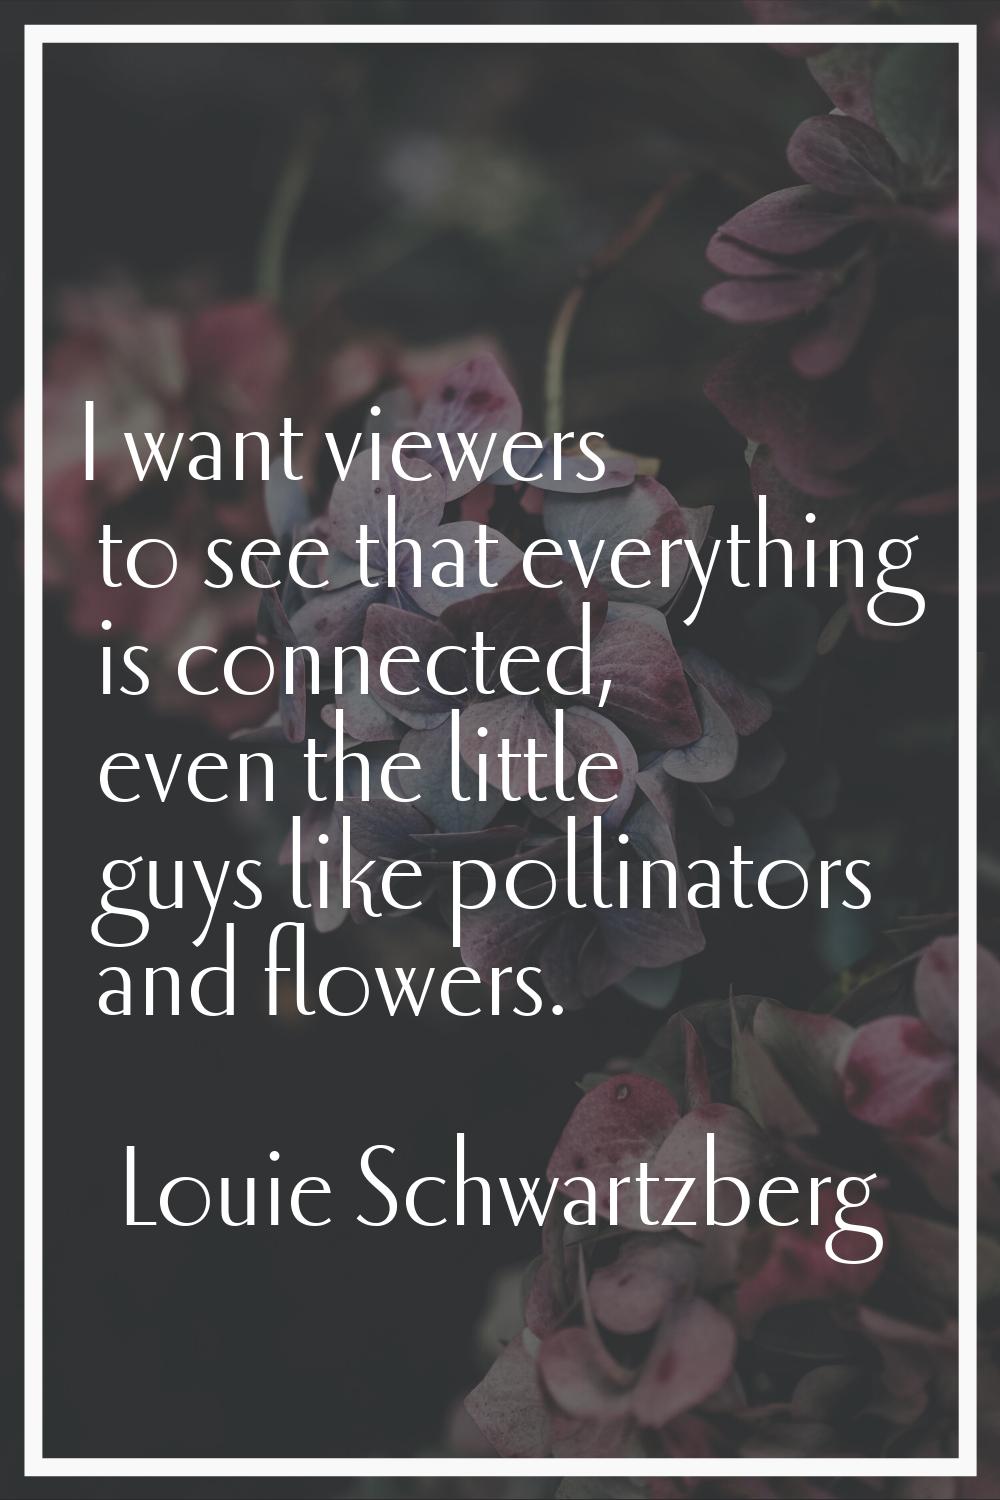 I want viewers to see that everything is connected, even the little guys like pollinators and flowe